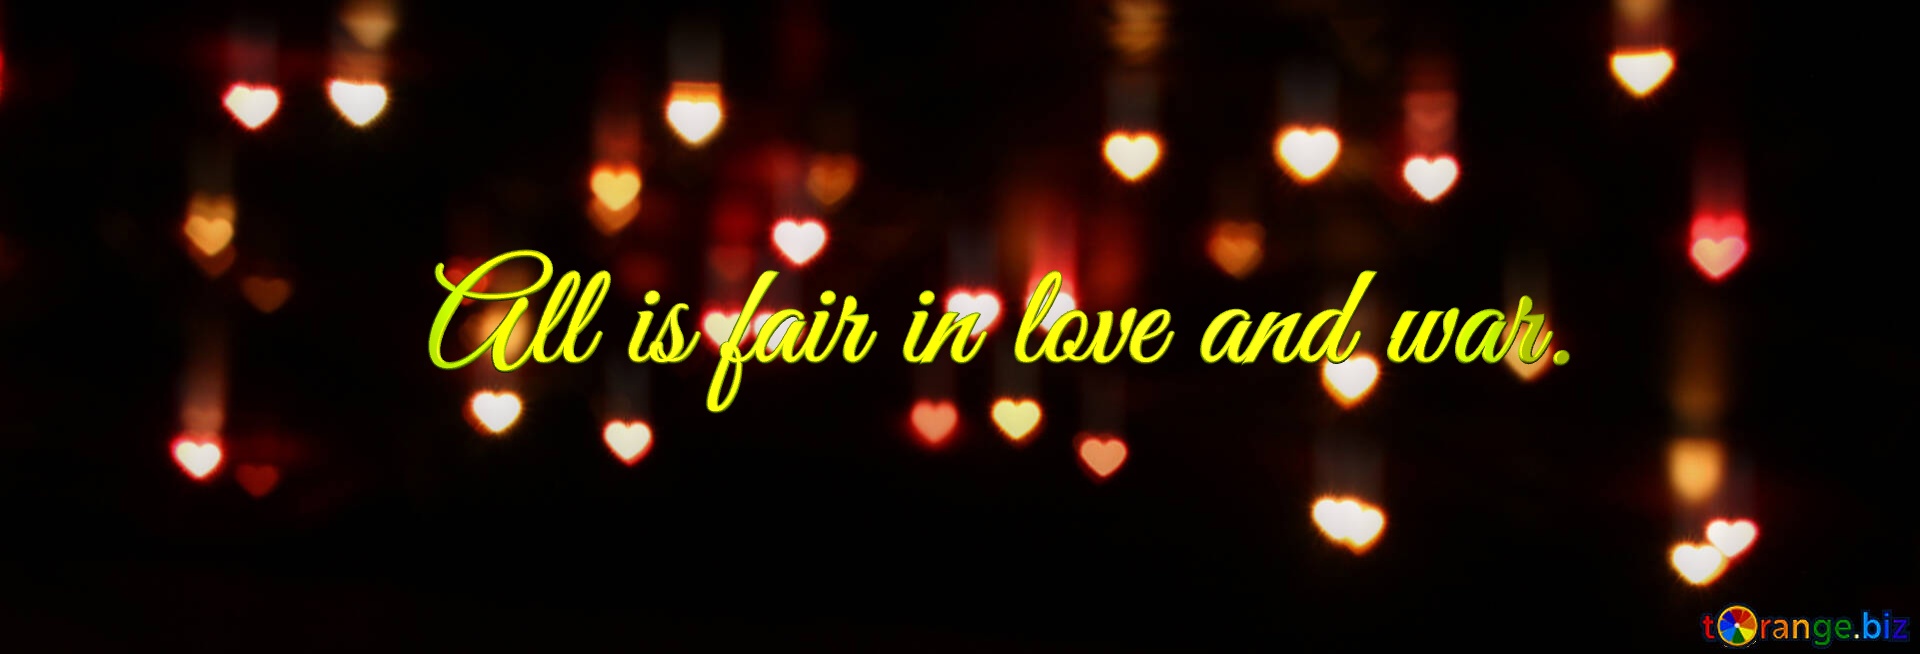 Cover for Facebook   All is fair in love and war. Hearts cover on Facebook №37853